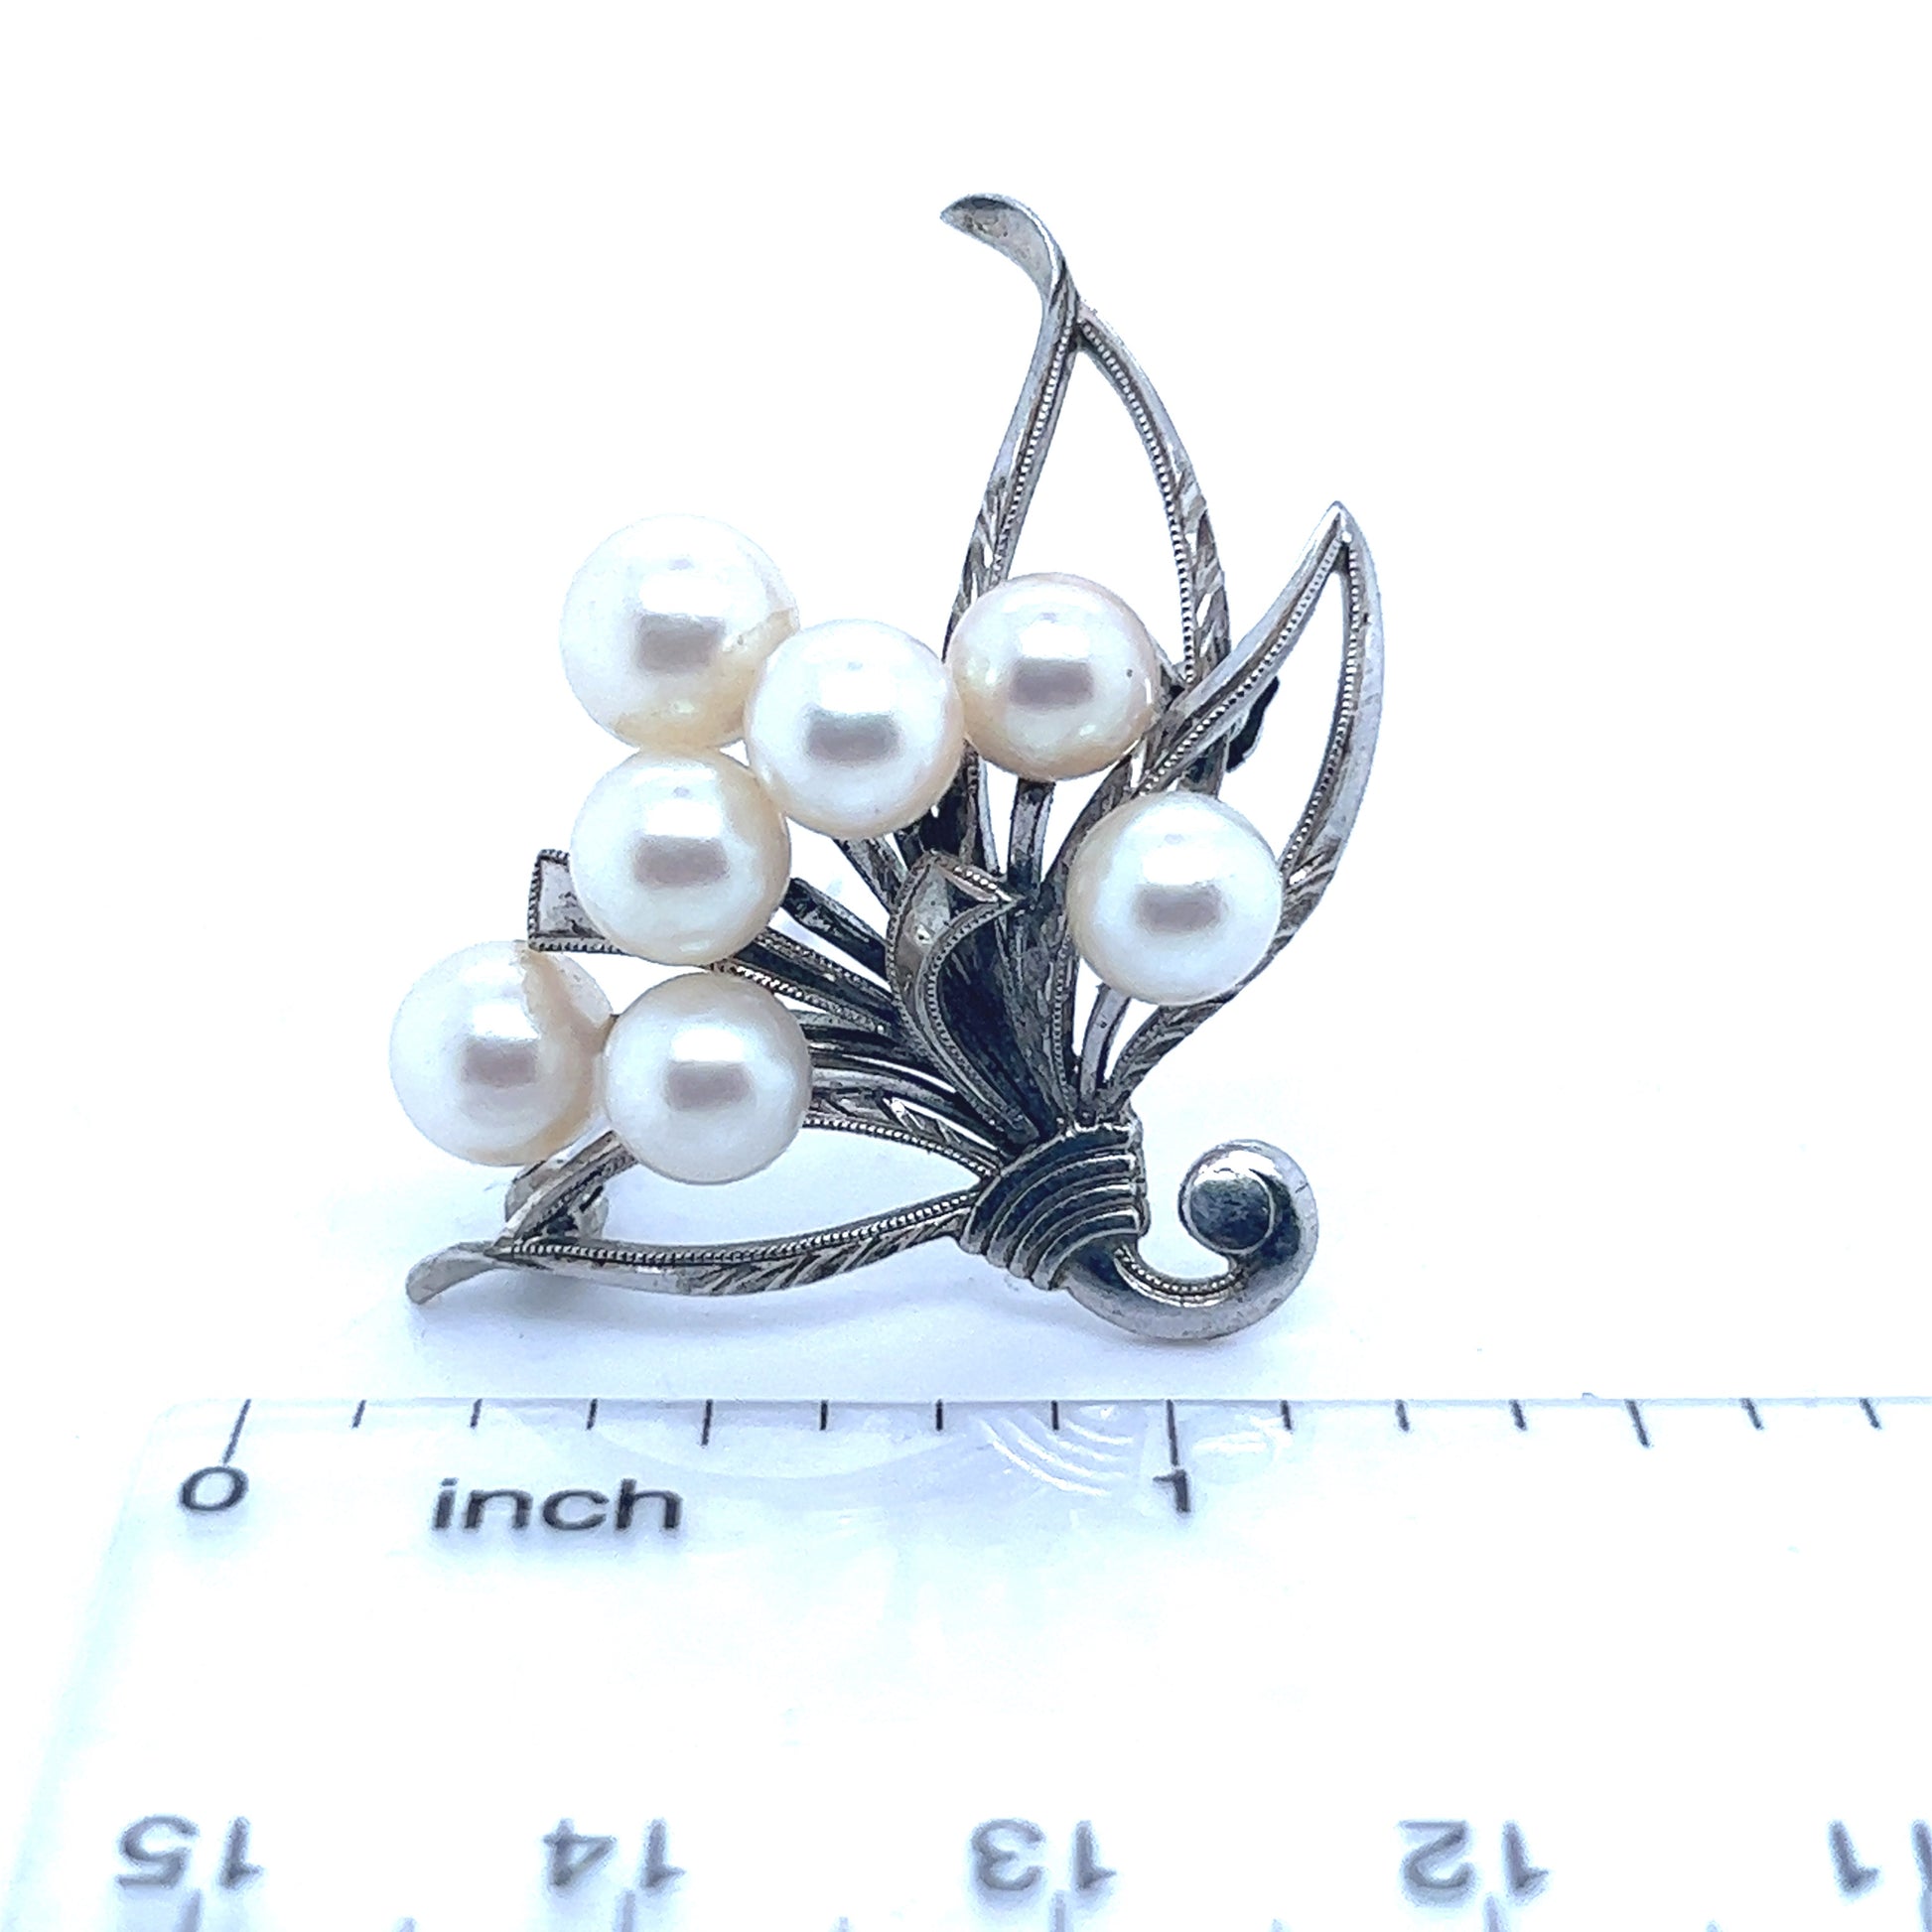 Mikimoto Authentic Estate Akoya Pearl Brooch Pin Sterling Silver 6.74 mm M303 - Certified Fine Jewelry